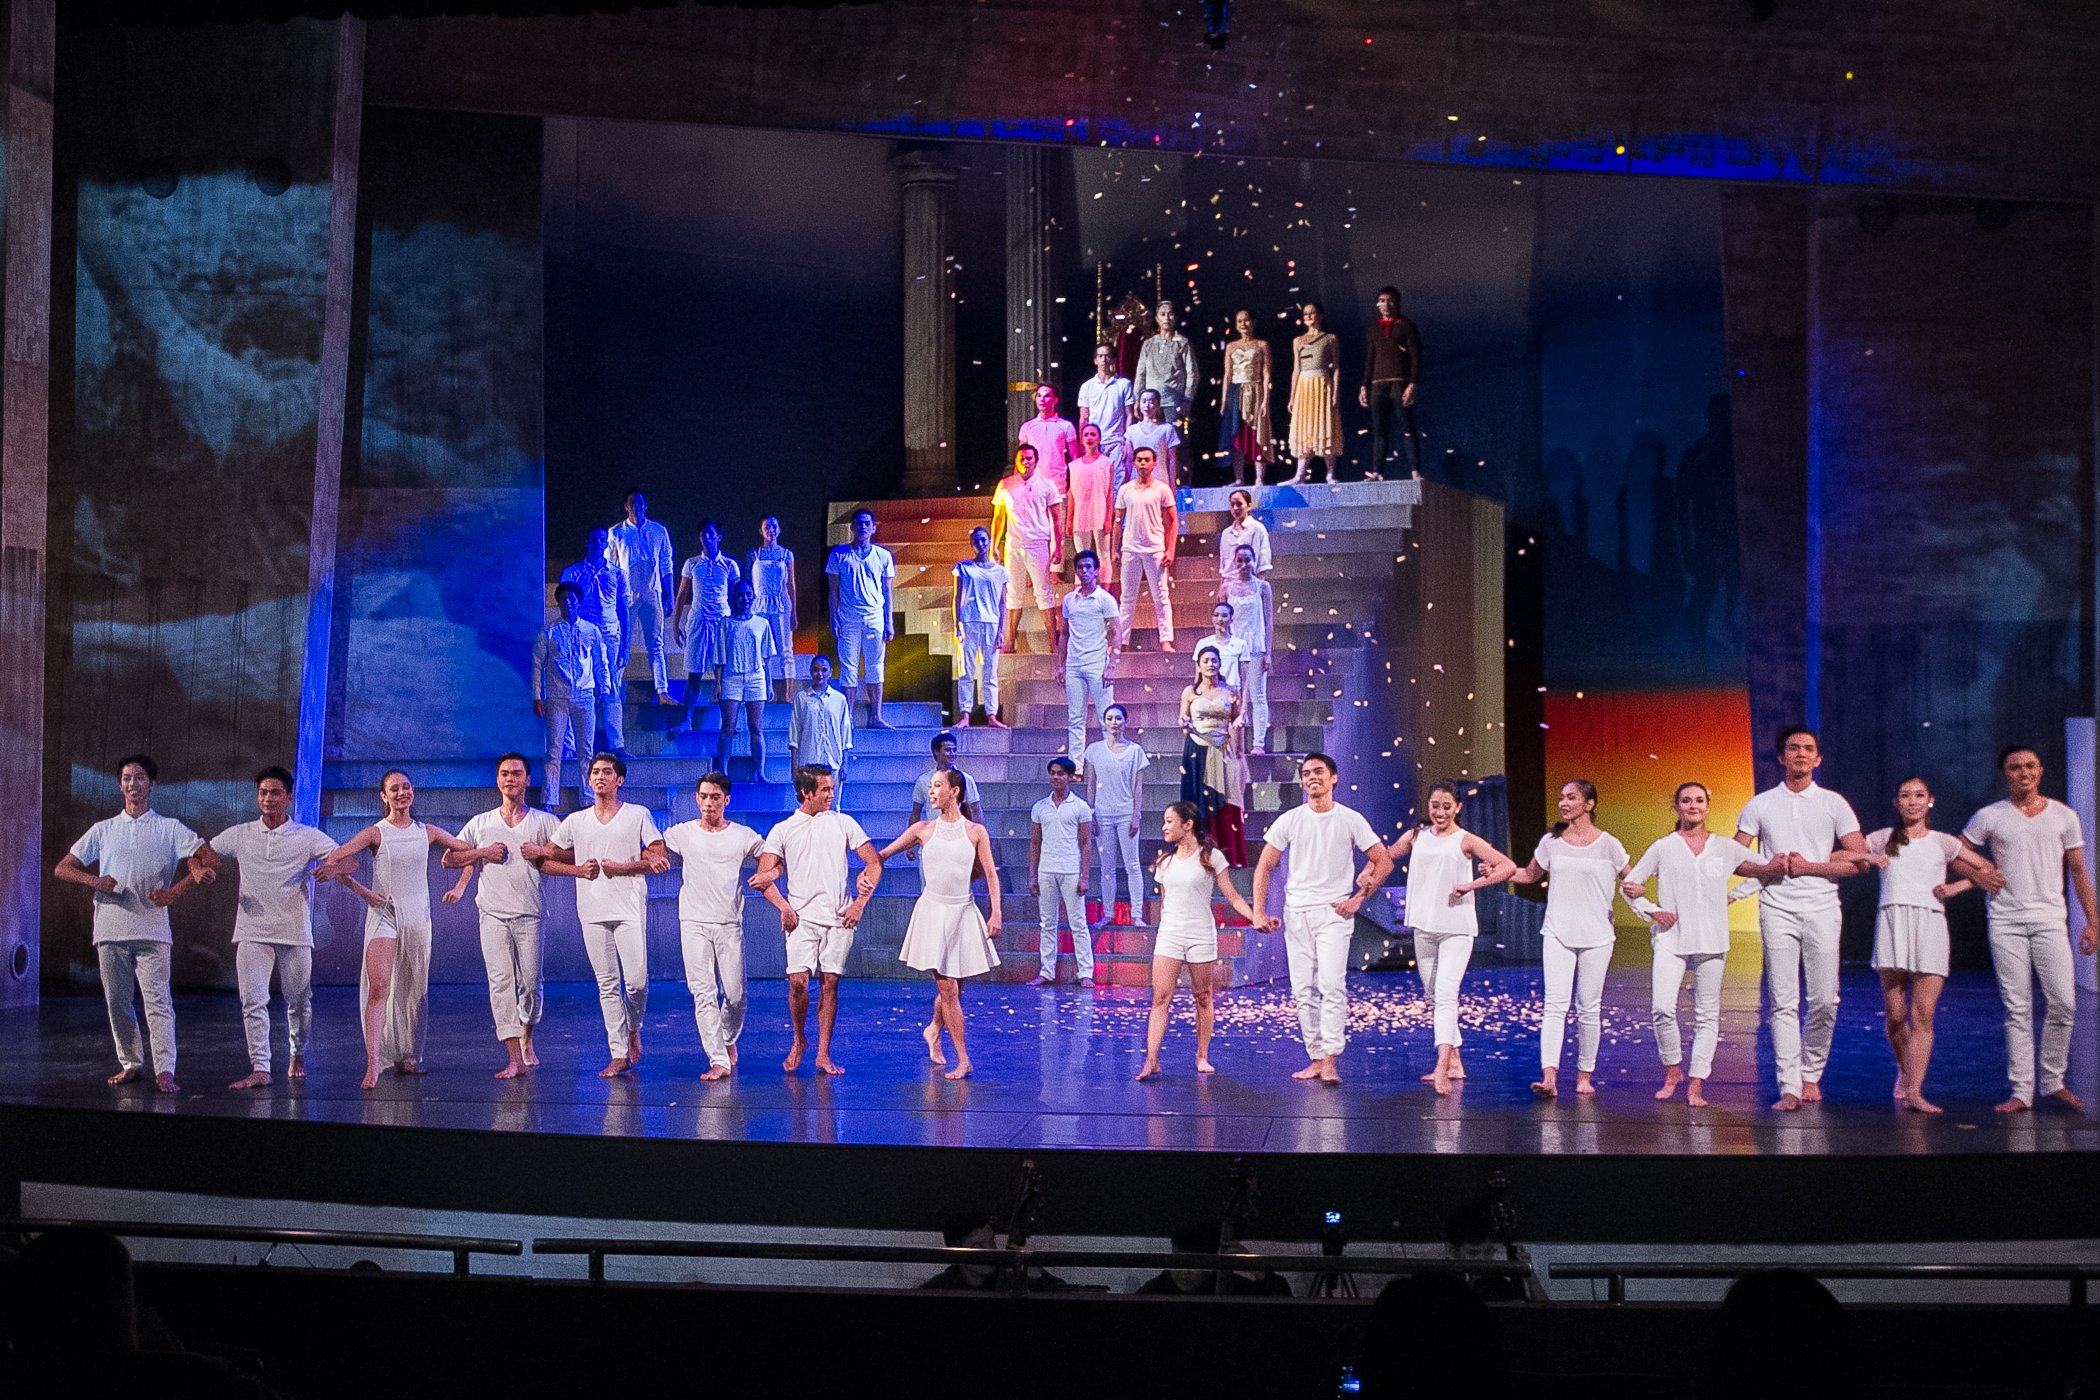    Symbolizing the triumph of good versus evil, the dancers in Martin Lawrance’s  Rebel  (2016) are clad in a variety of white ensembles. It is a celebratory scene where, after the people come together and link arms in a gesture known as “ kapit-bisi